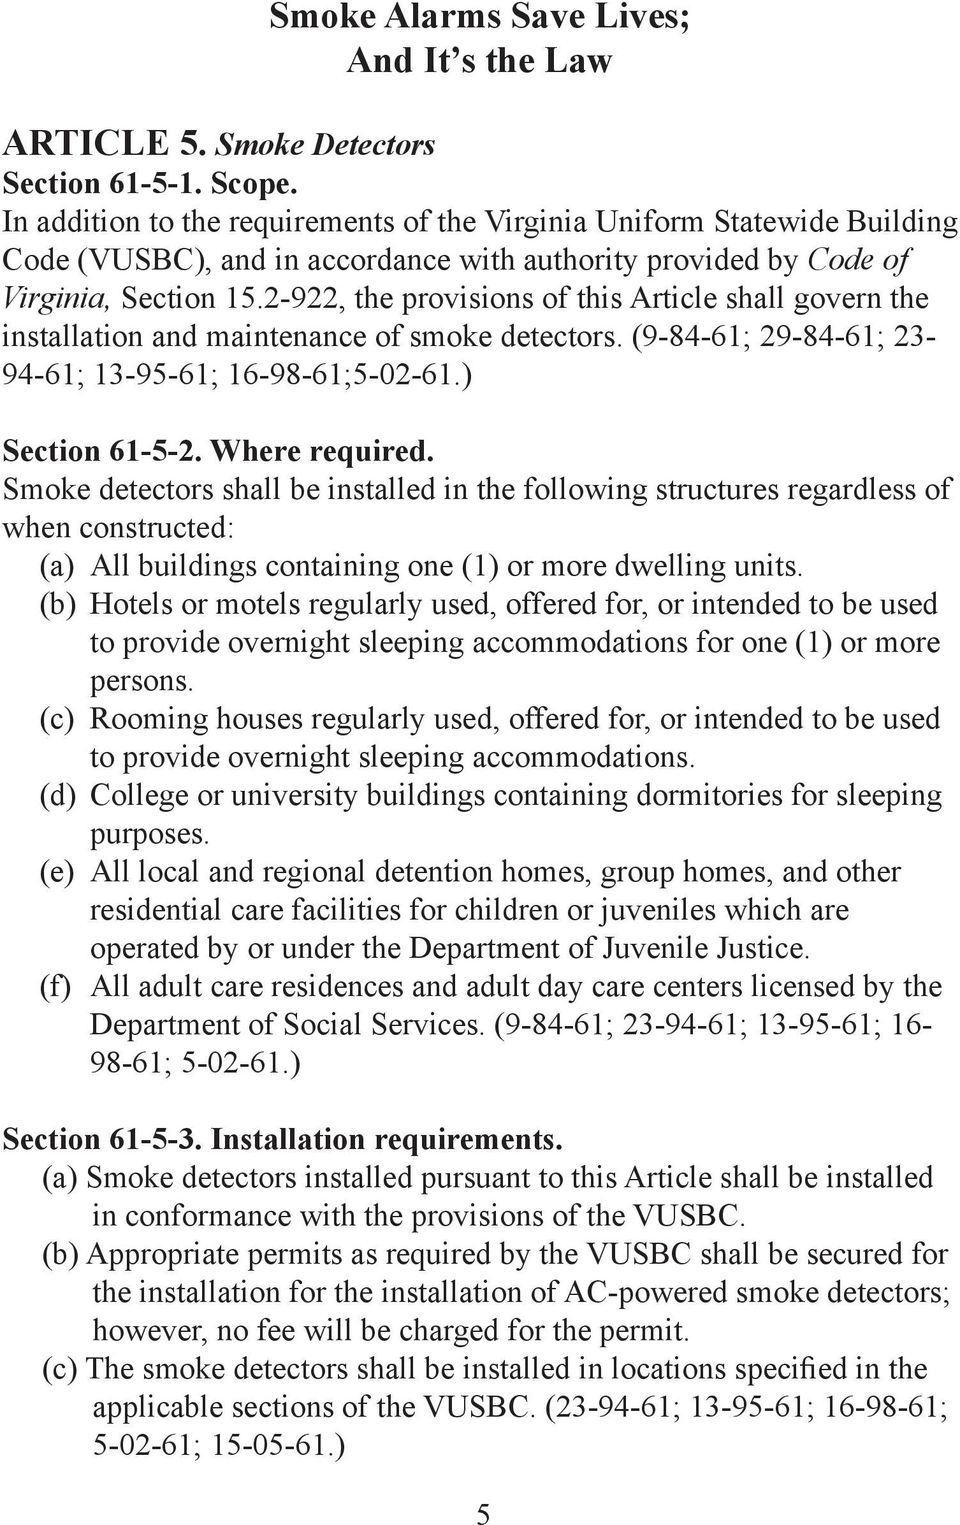 2-922, the provisions of this Article shall govern the installation and maintenance of smoke detectors. (9-84-61; 29-84-61; 23-94-61; 13-95-61; 16-98-61;5-02-61.) Section 61-5-2. Where required.